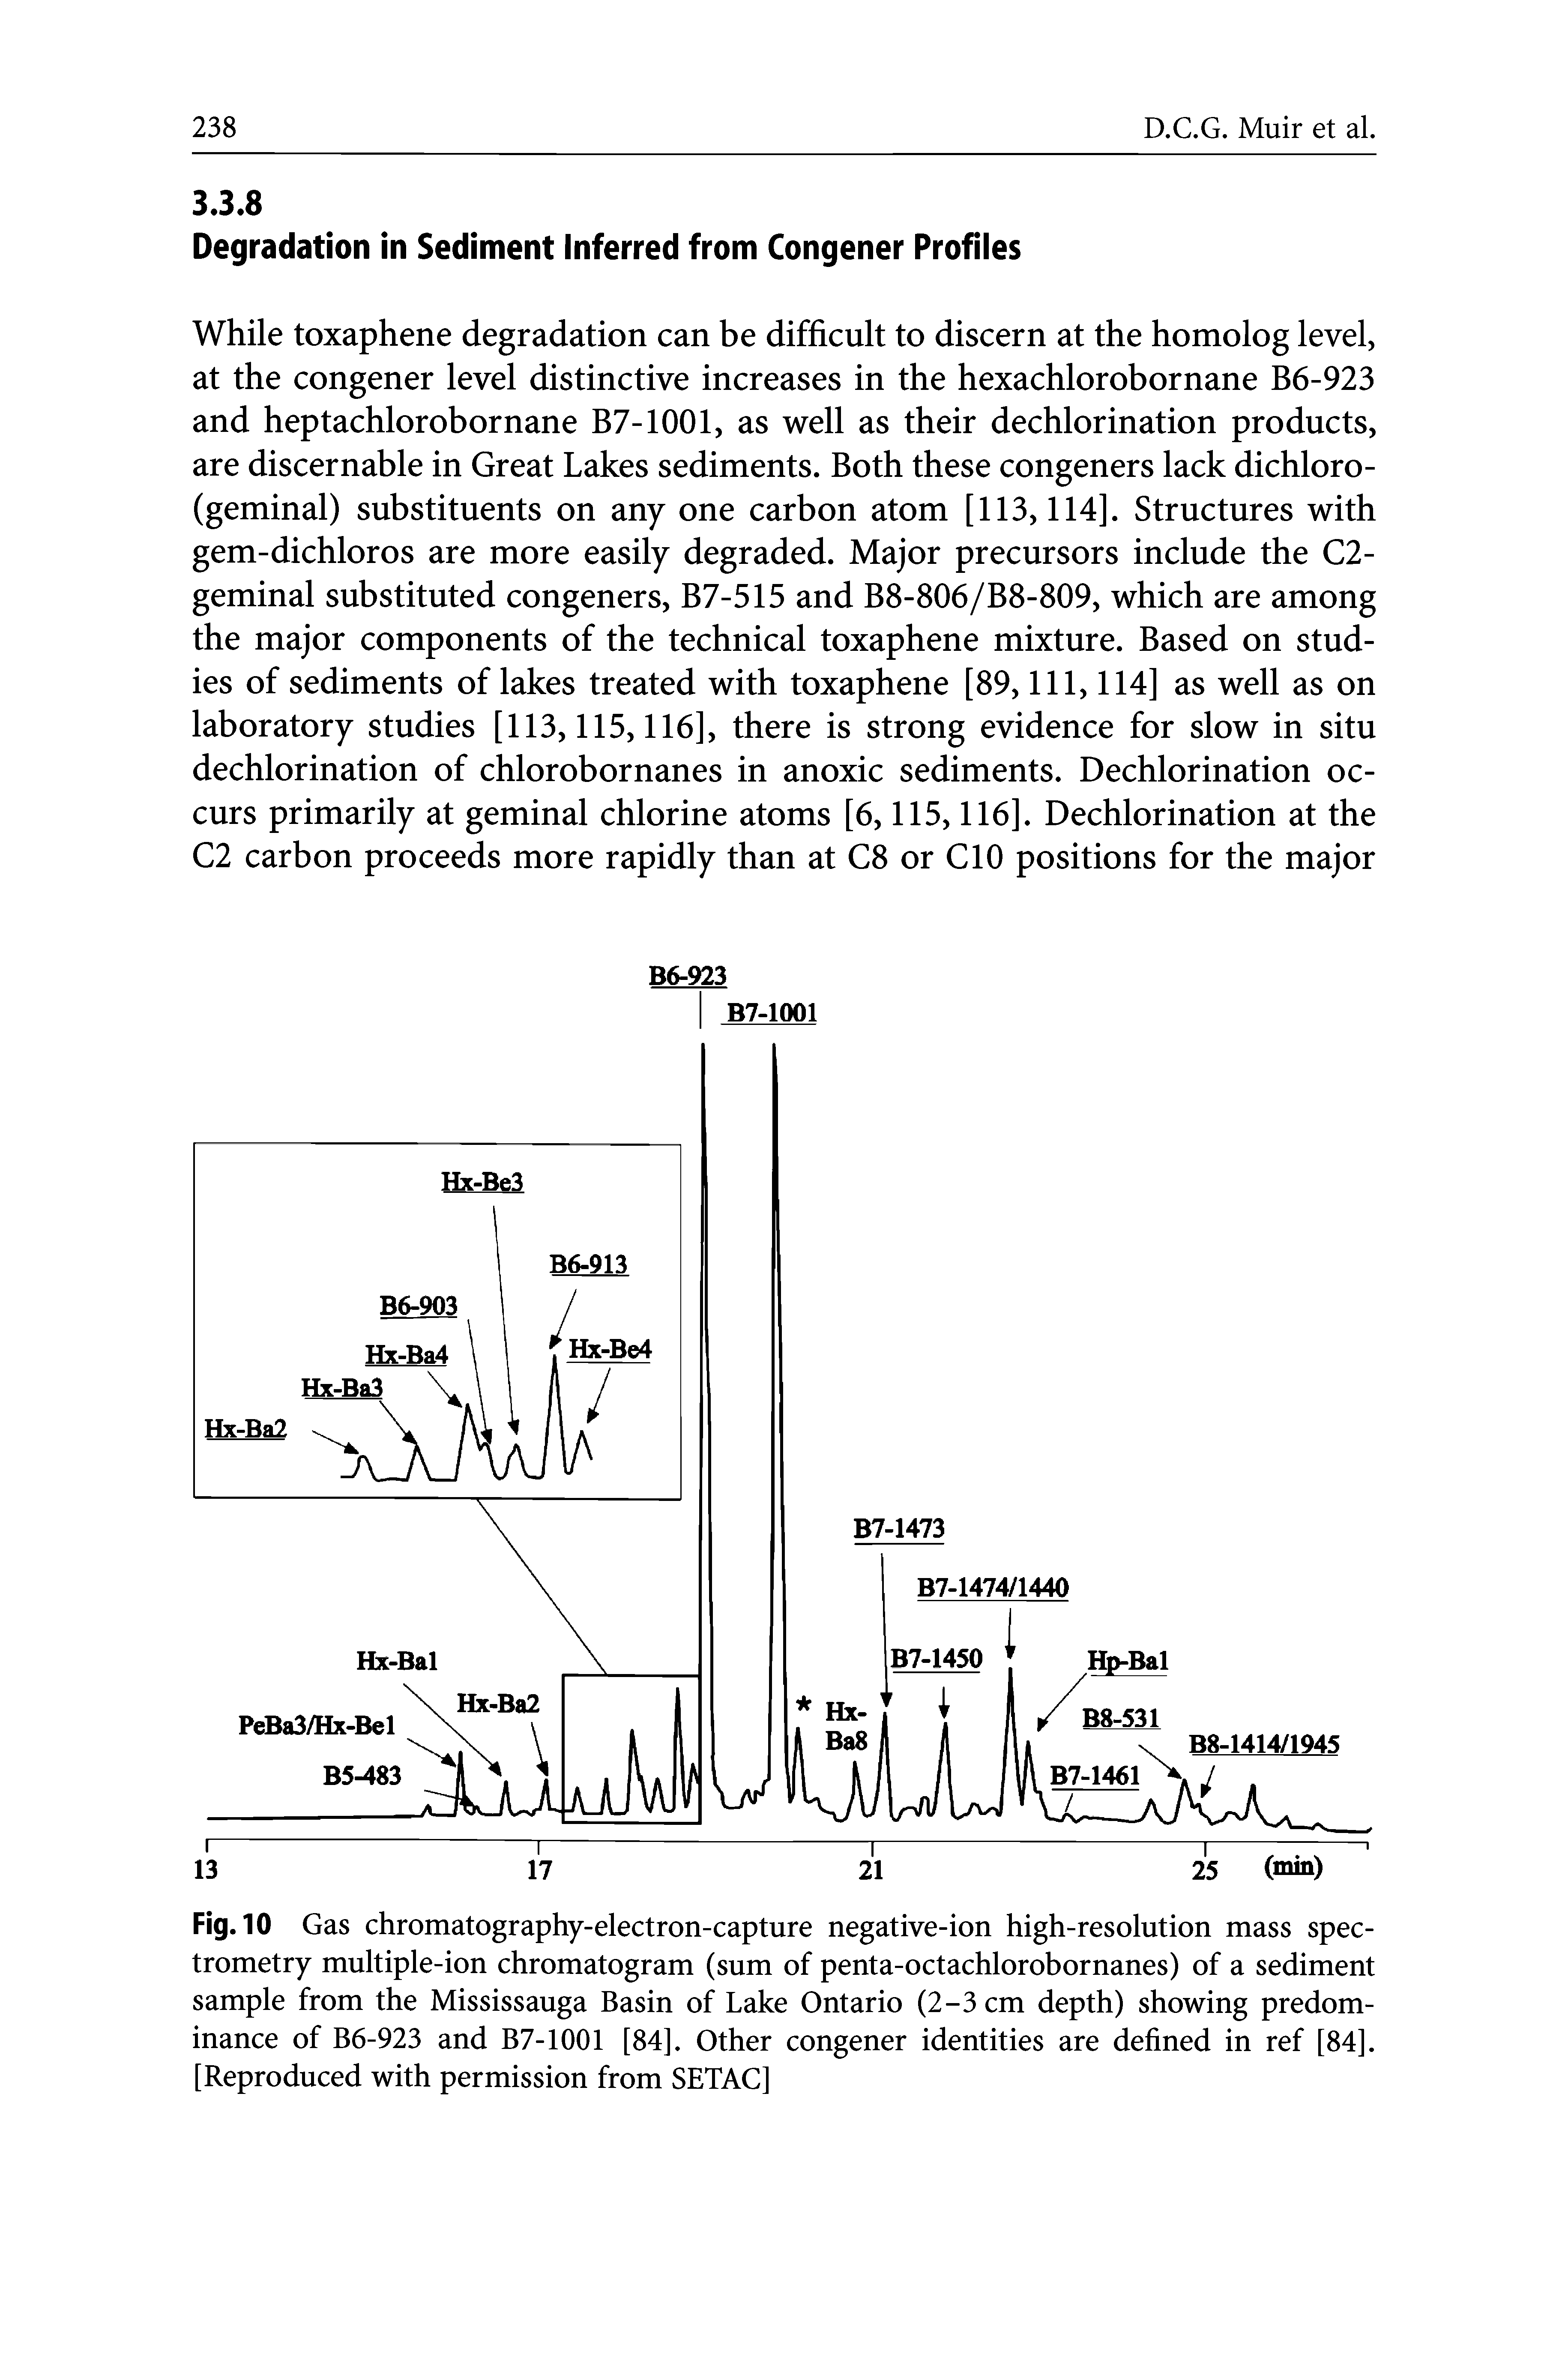 Fig. 10 Gas chromatography-electron-capture negative-ion high-resolution mass spectrometry multiple-ion chromatogram (sum of penta-octachlorobornanes) of a sediment sample from the Mississauga Basin of Lake Ontario (2-3 cm depth) showing predominance of B6-923 and B7-1001 [84]. Other congener identities are defined in ref [84]. [Reproduced with permission from SETAC]...